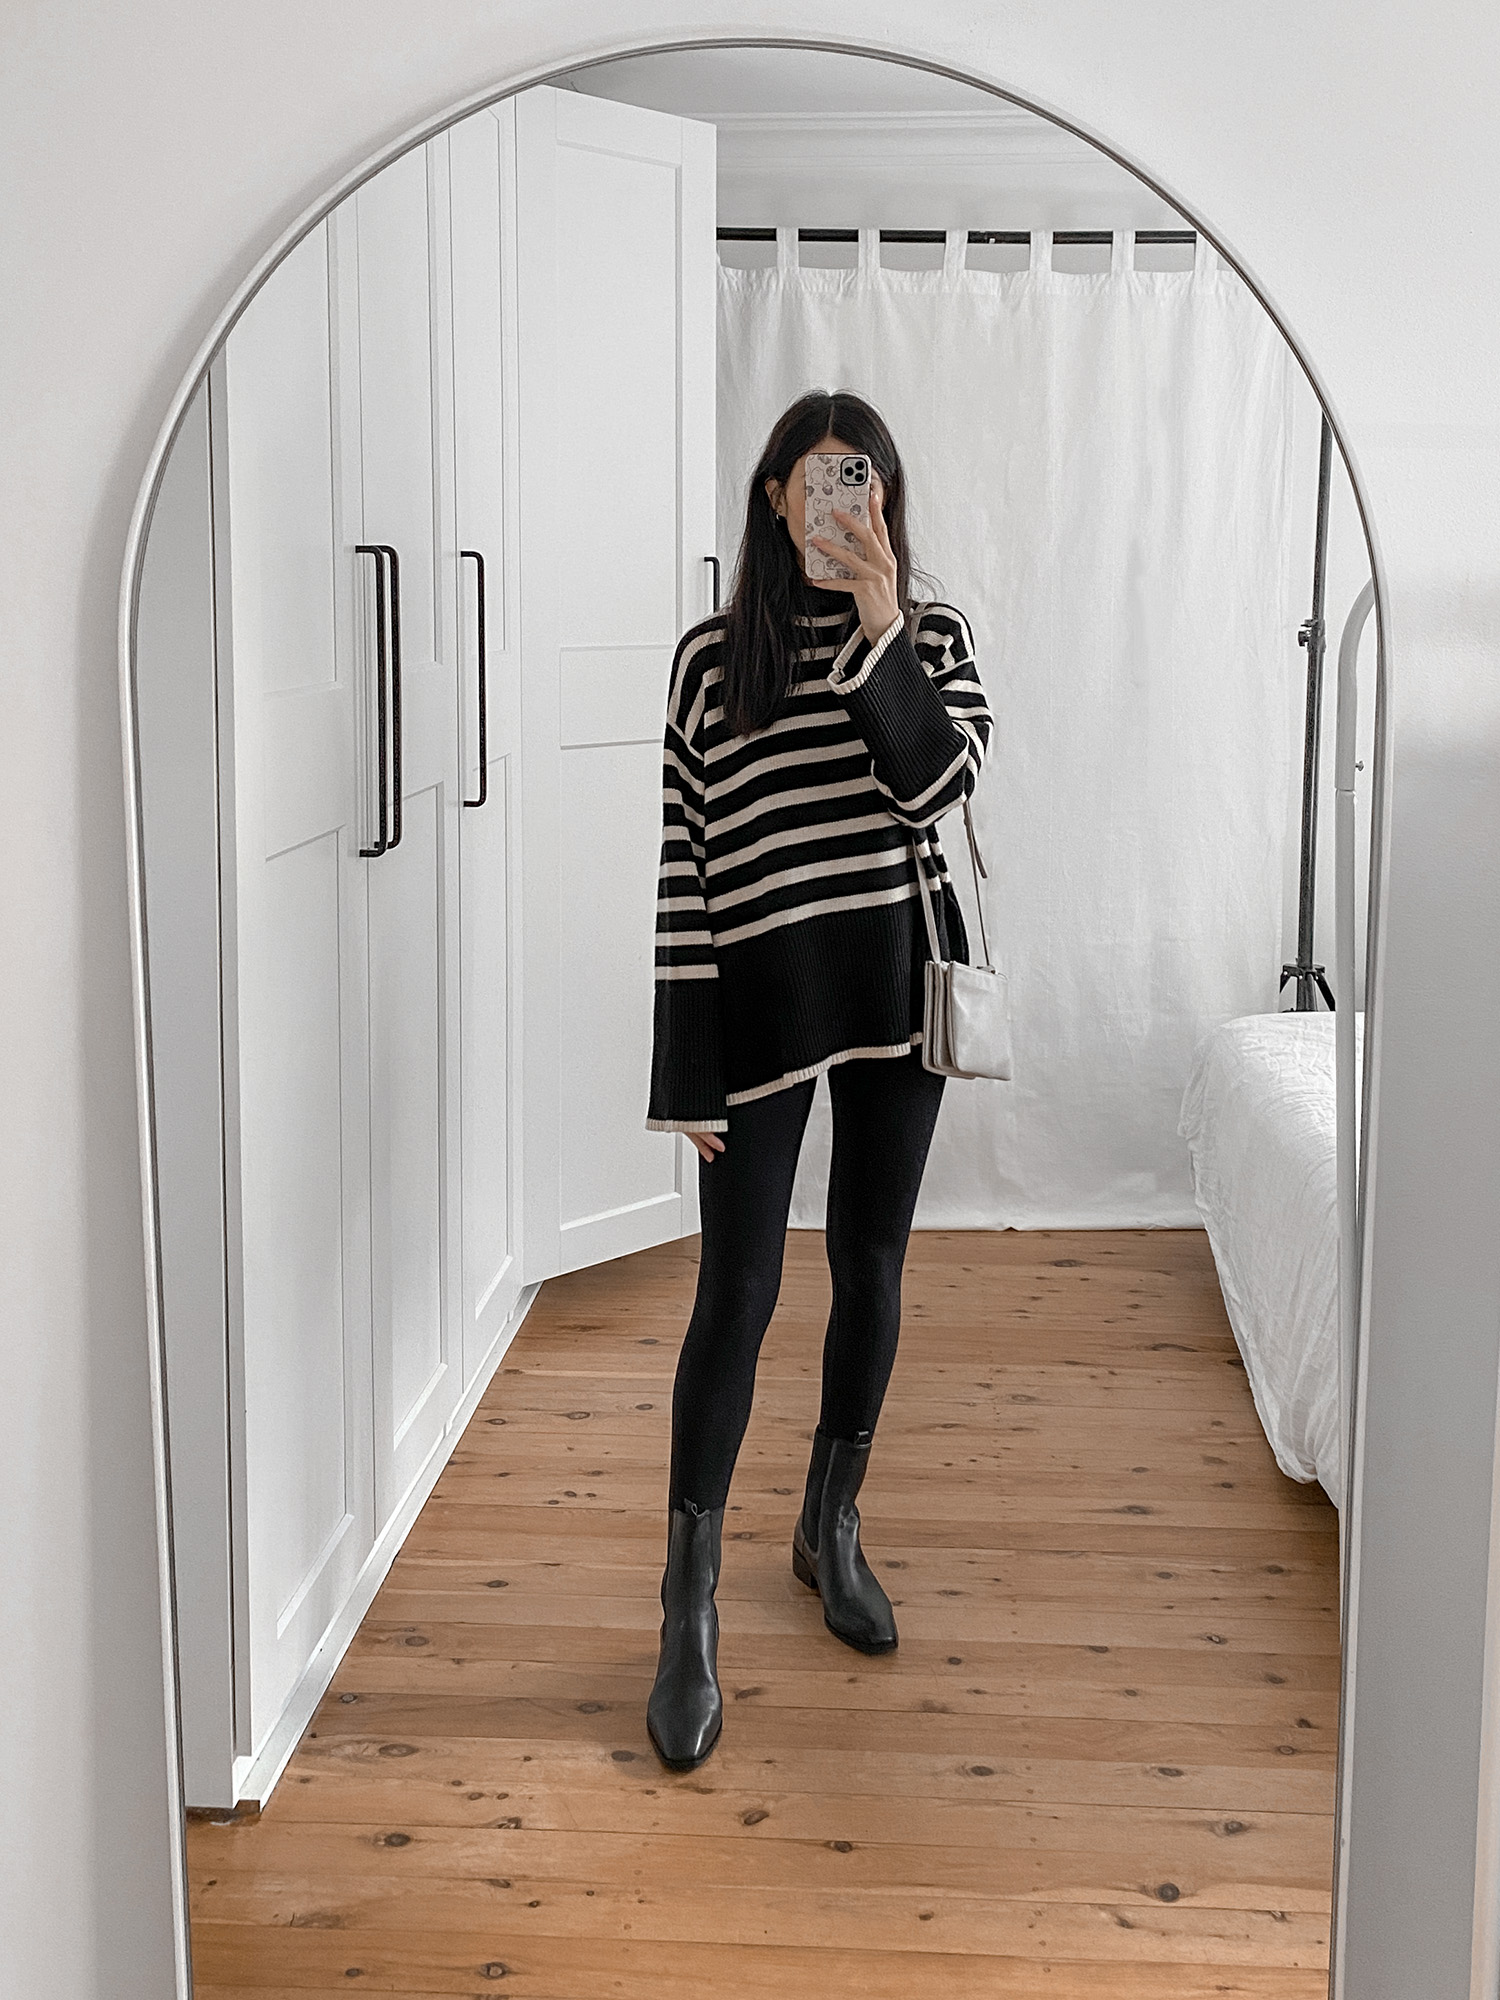 Five ways to style a Toteme striped Roll neck sweater